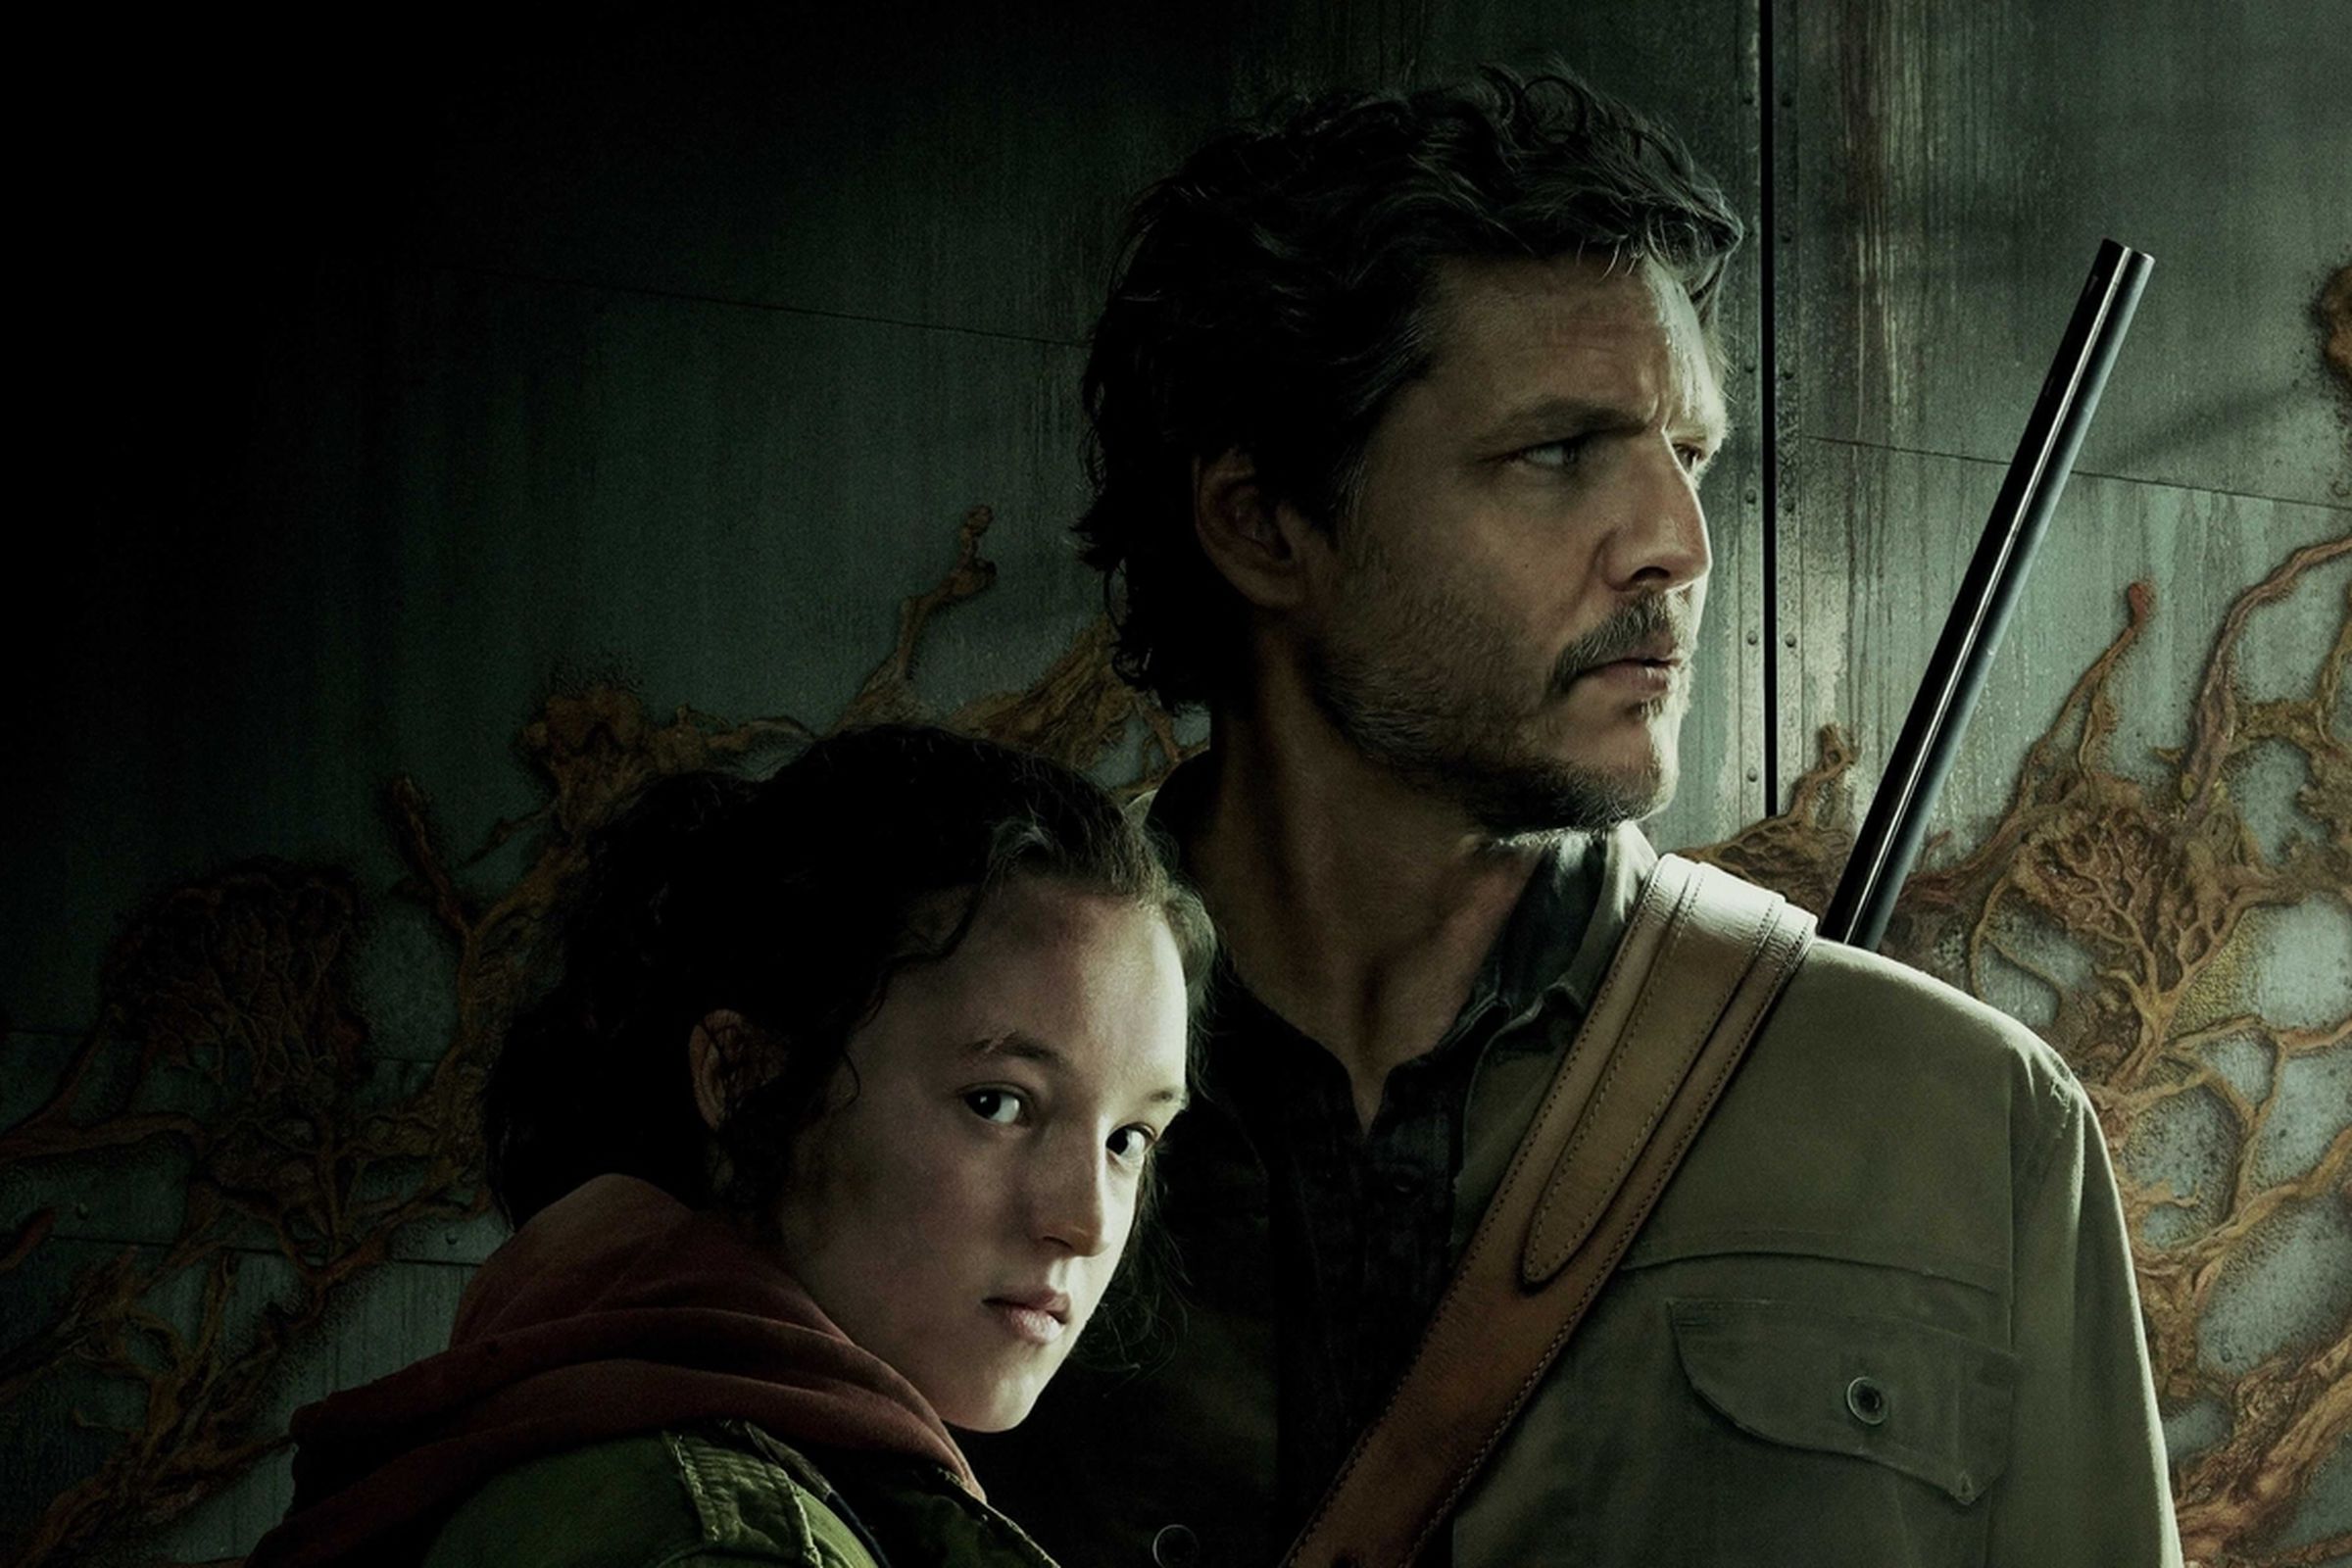 Bella Ramsey (Ellie) with her head lying against Pedro Pascal’s (Joel) chest as he holds up a gun and looks the other way.